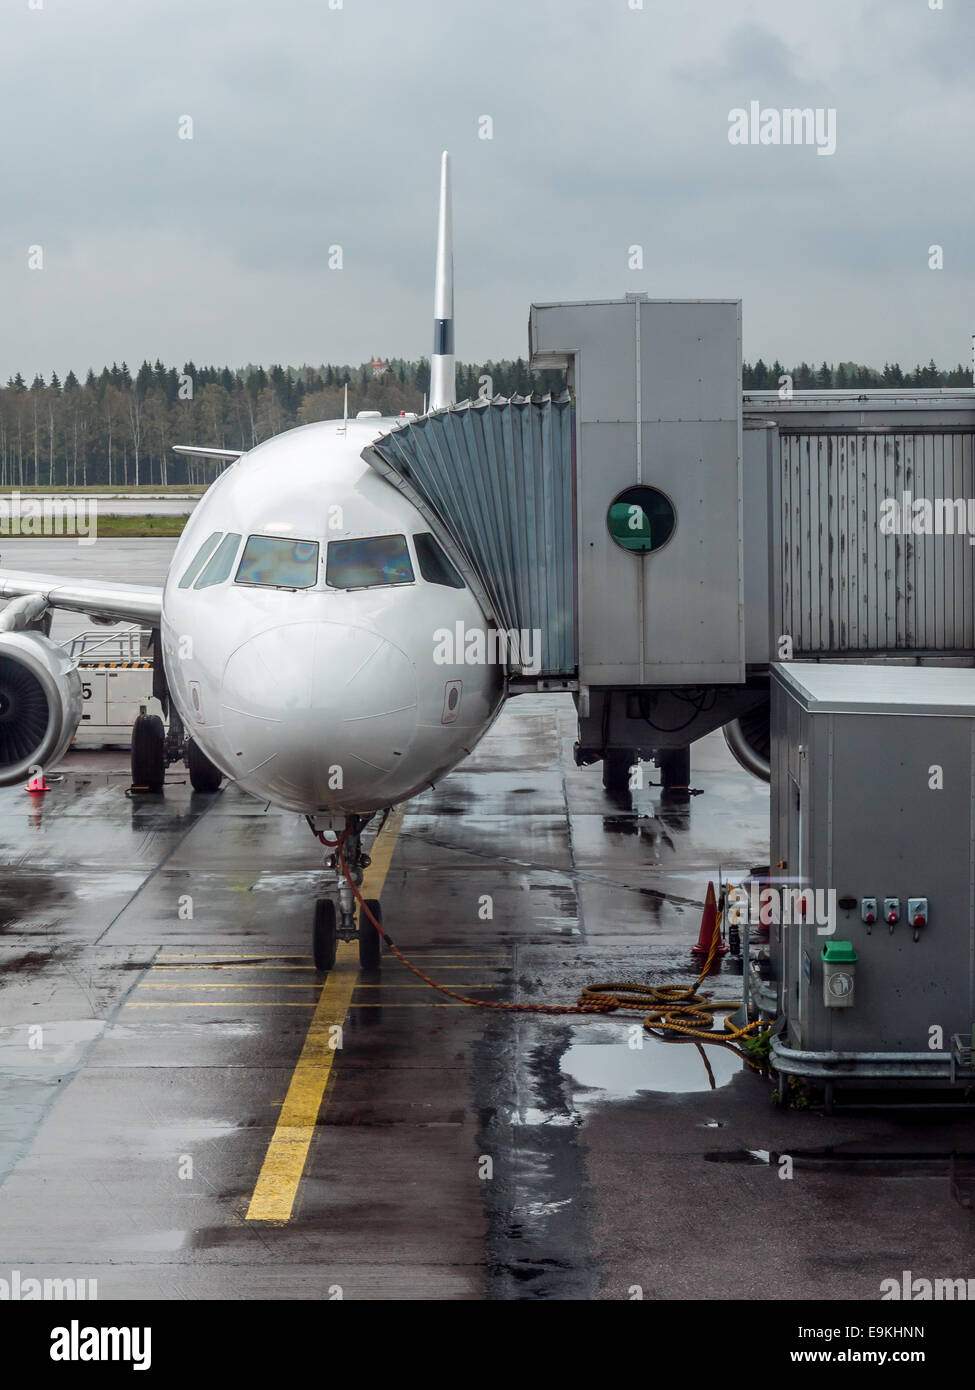 Passenger airplane parked at the airport terminal with telescopic corridor attached while boarding Stock Photo